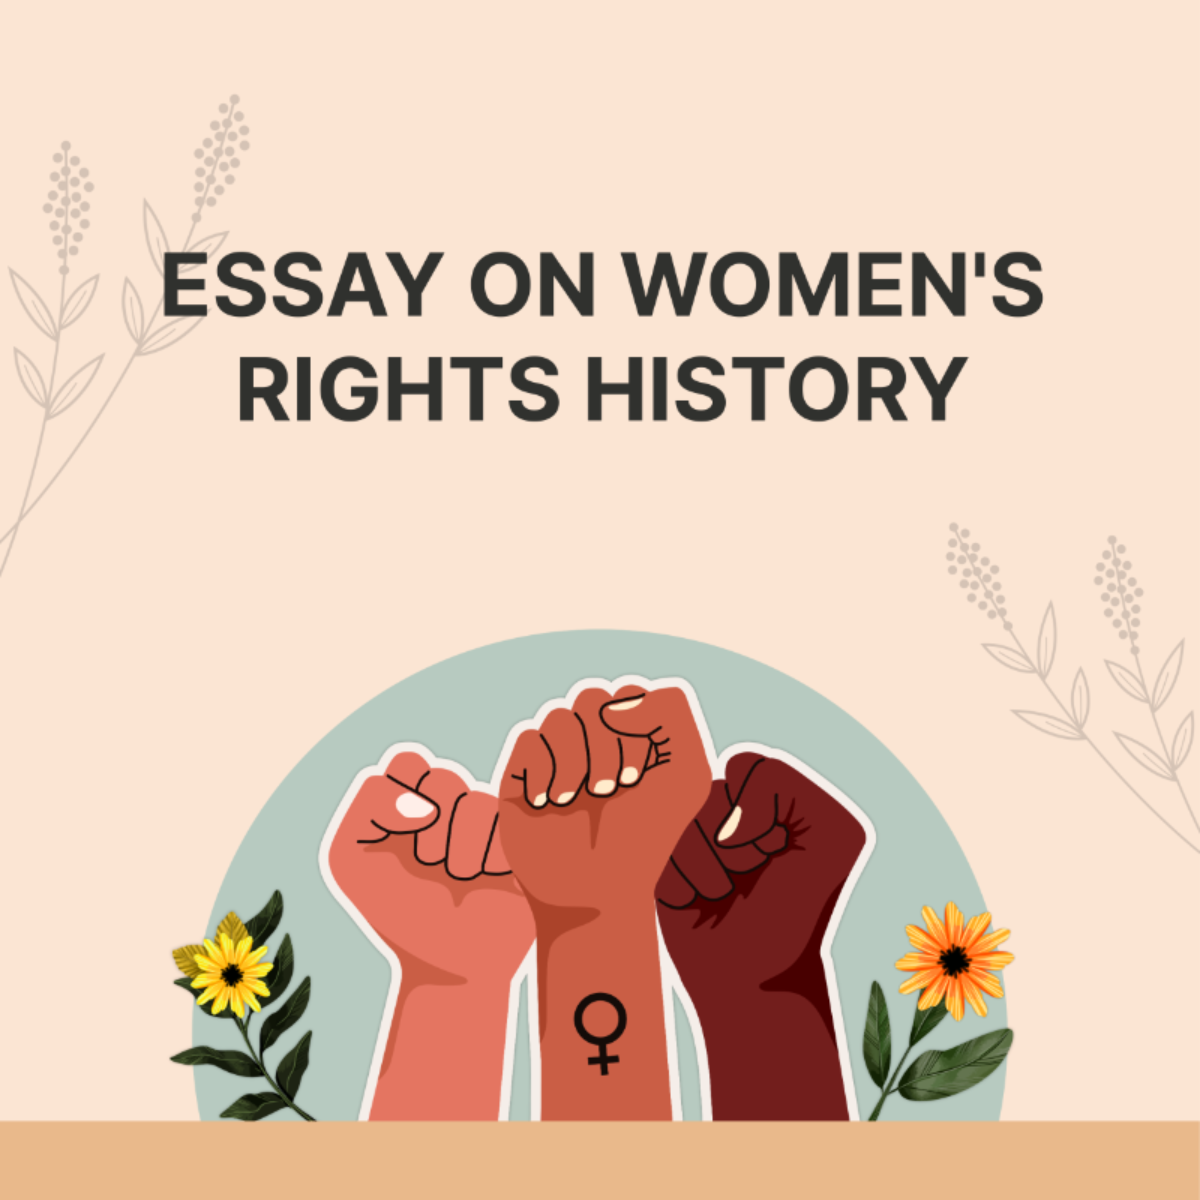 History of Women's Rights Movement Essay Template